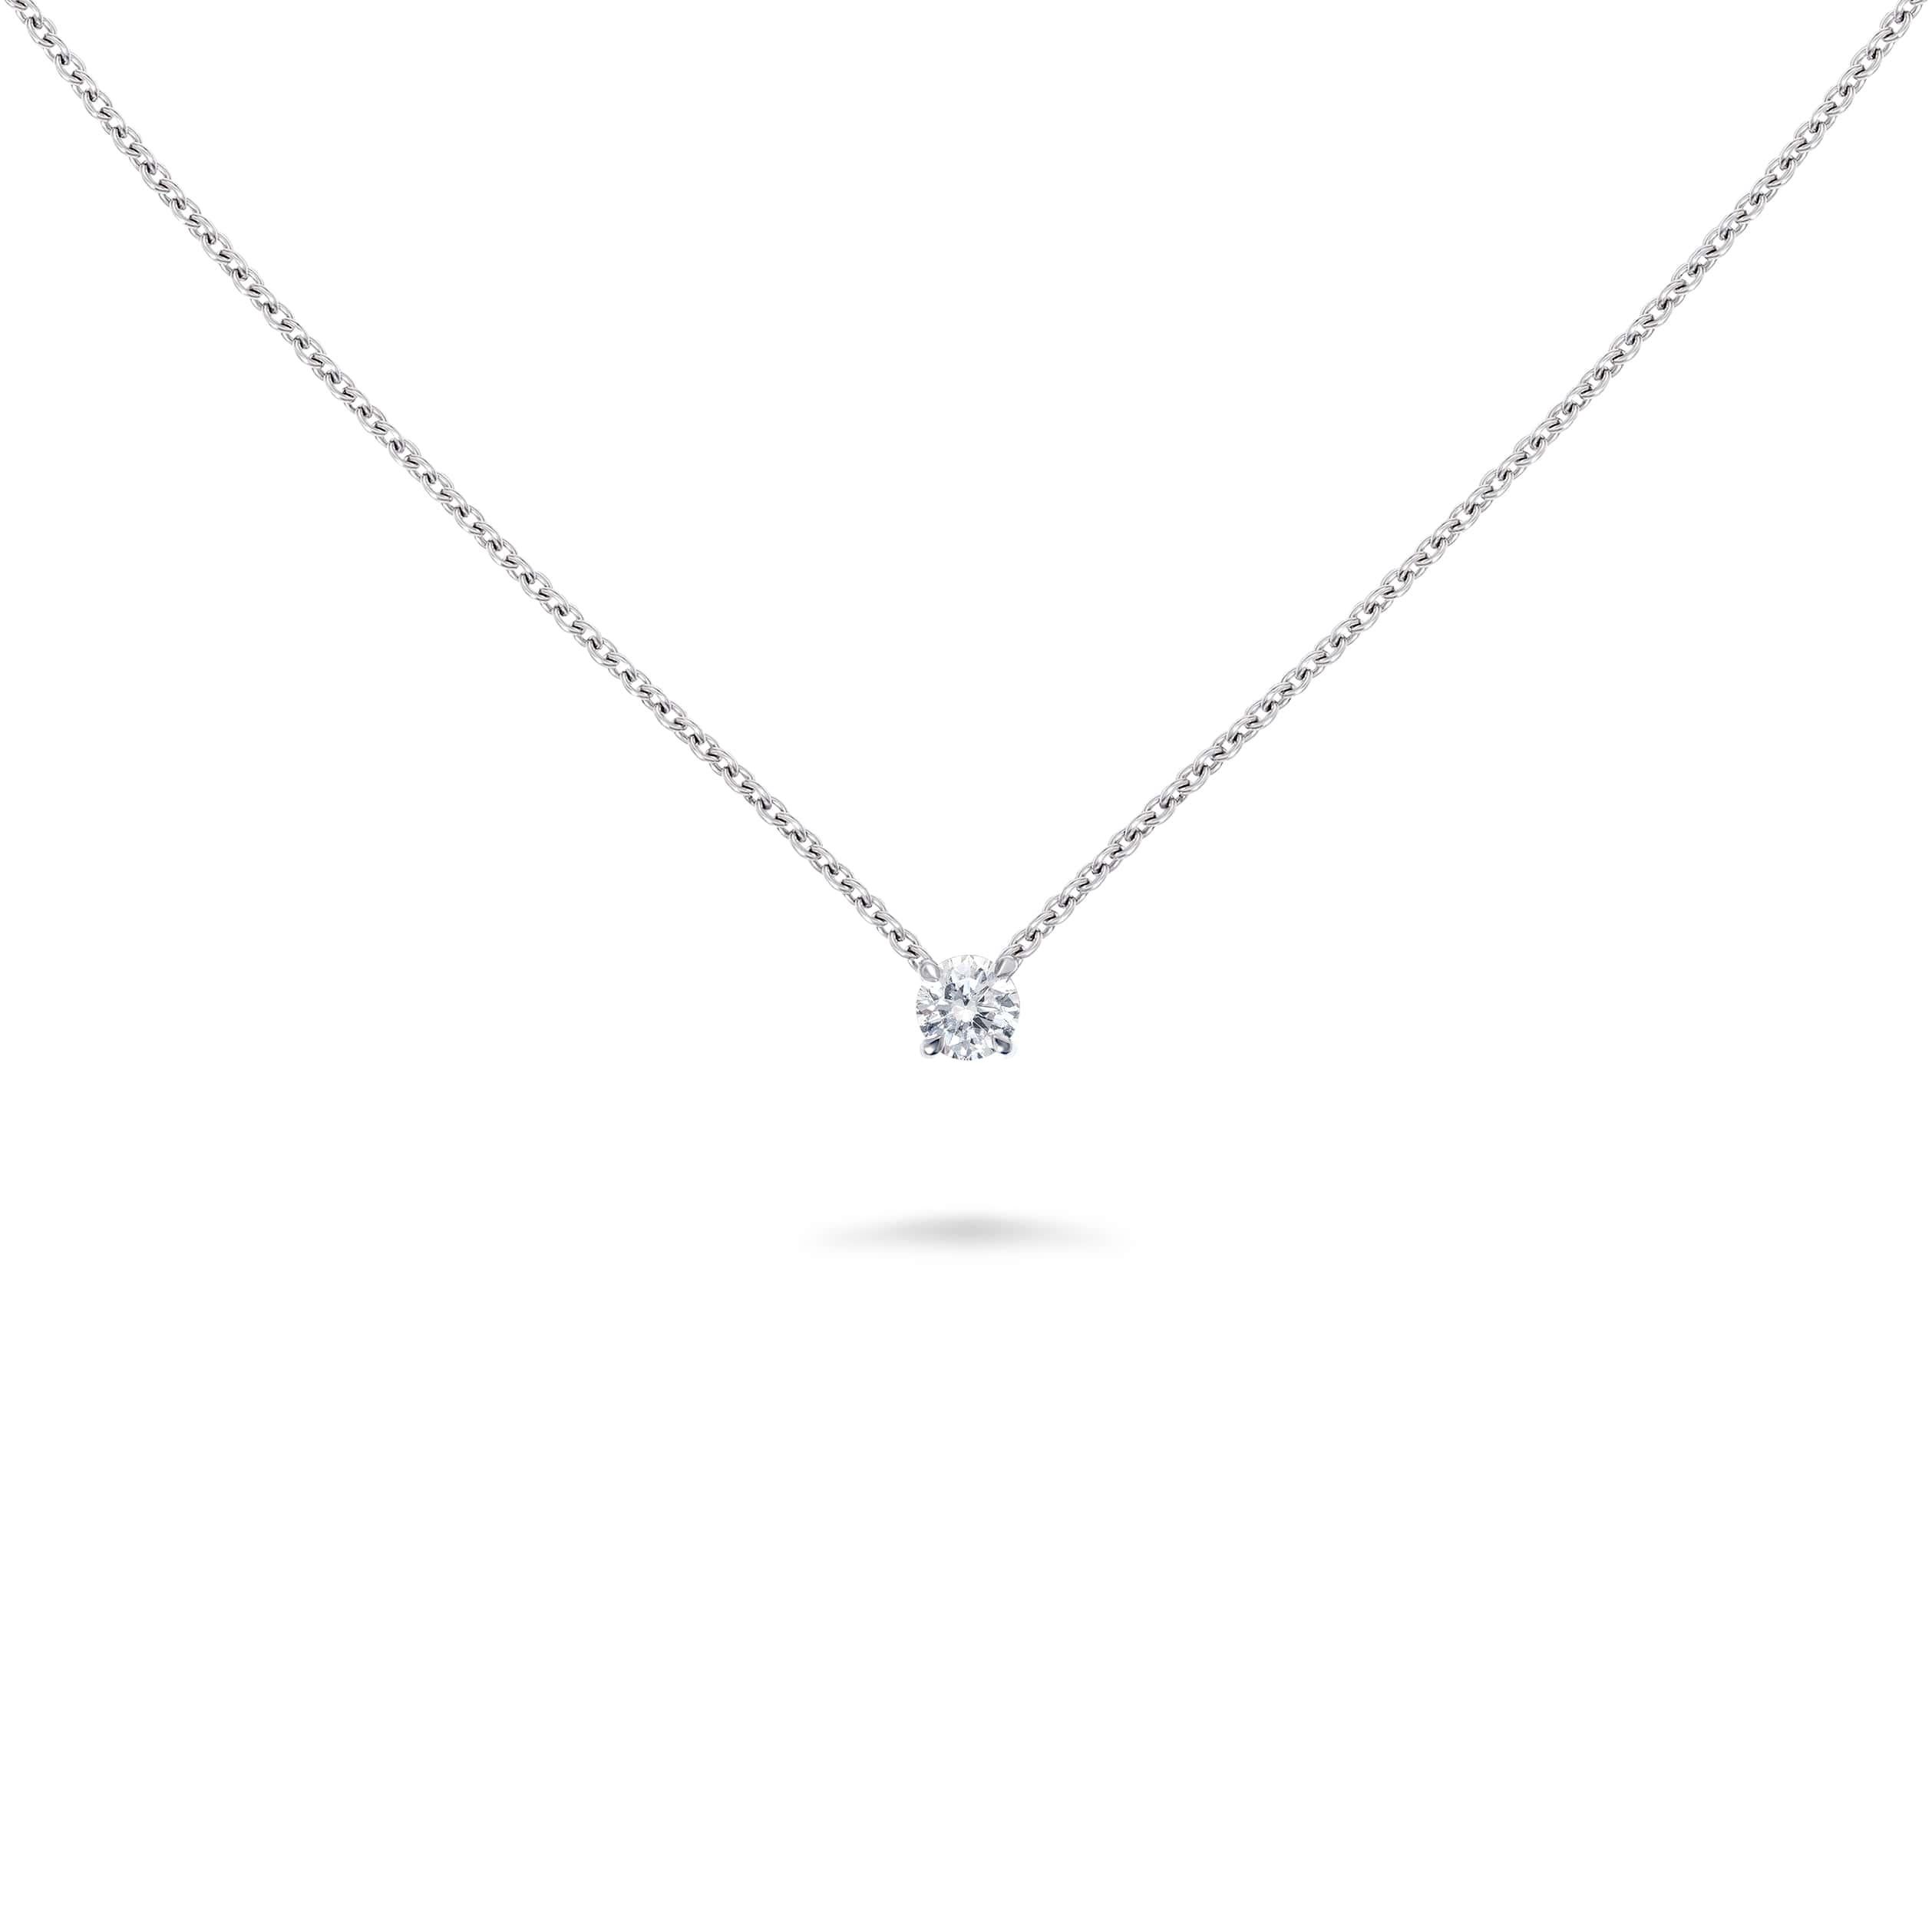 Experience timeless elegance with the exquisite 0.30 Carat round brilliant White Diamond Pendant by David Morris London. Crafted to perfection, this pendant exudes sophistication and grace. Set in an elegant 18ct white gold setting, the pendant sits